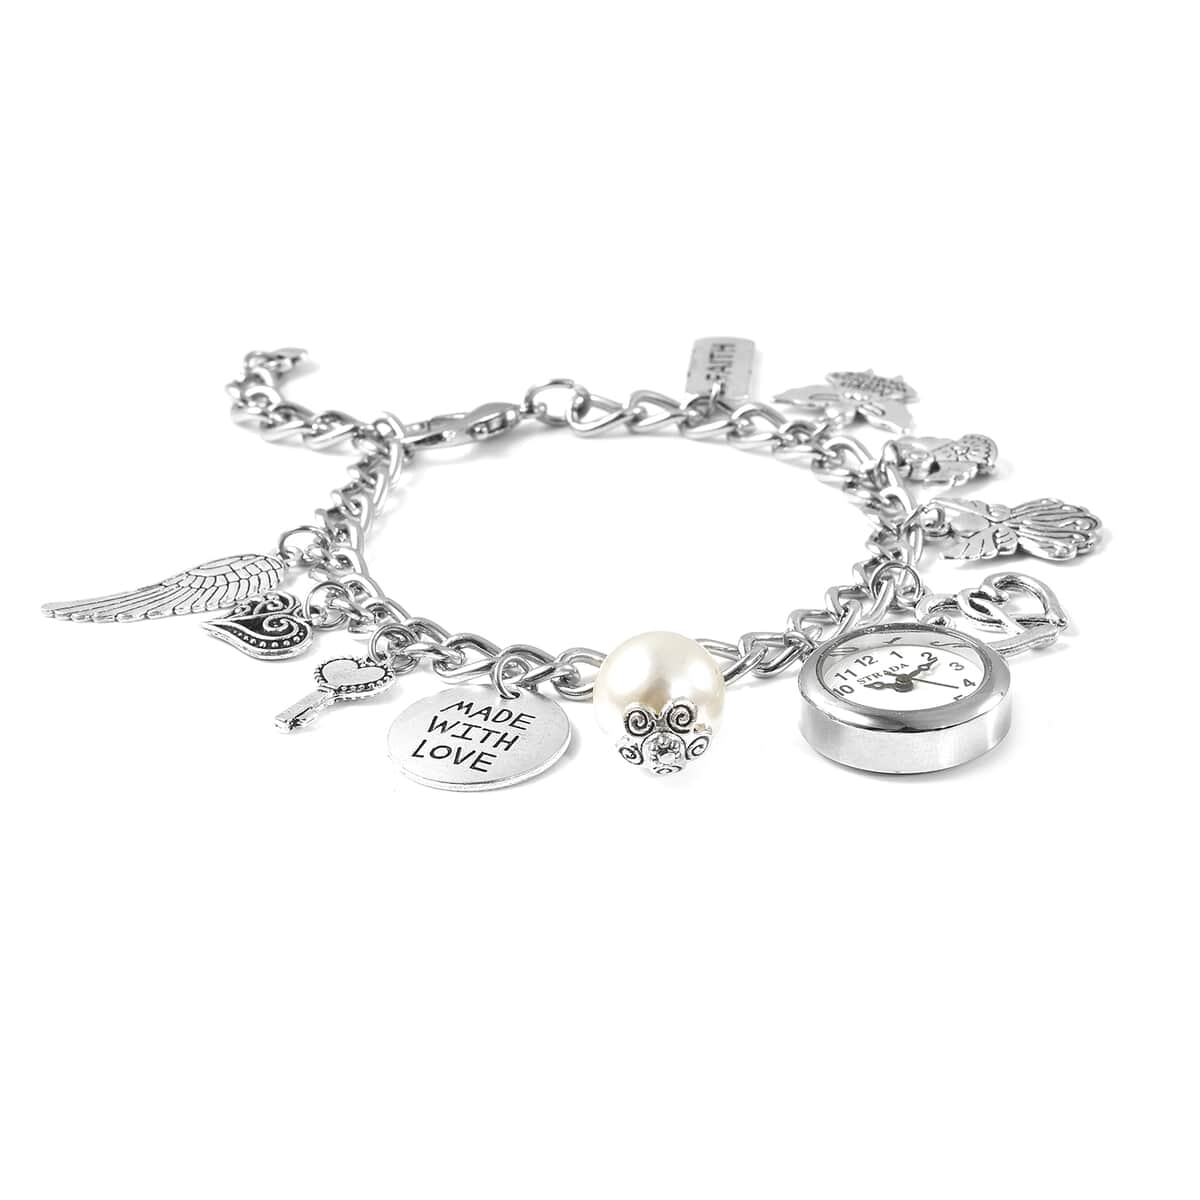 STRADA Japanese Movement Faith and Love White Bead Multi Charm Bracelet Watch (up to 9.5 inches) image number 3